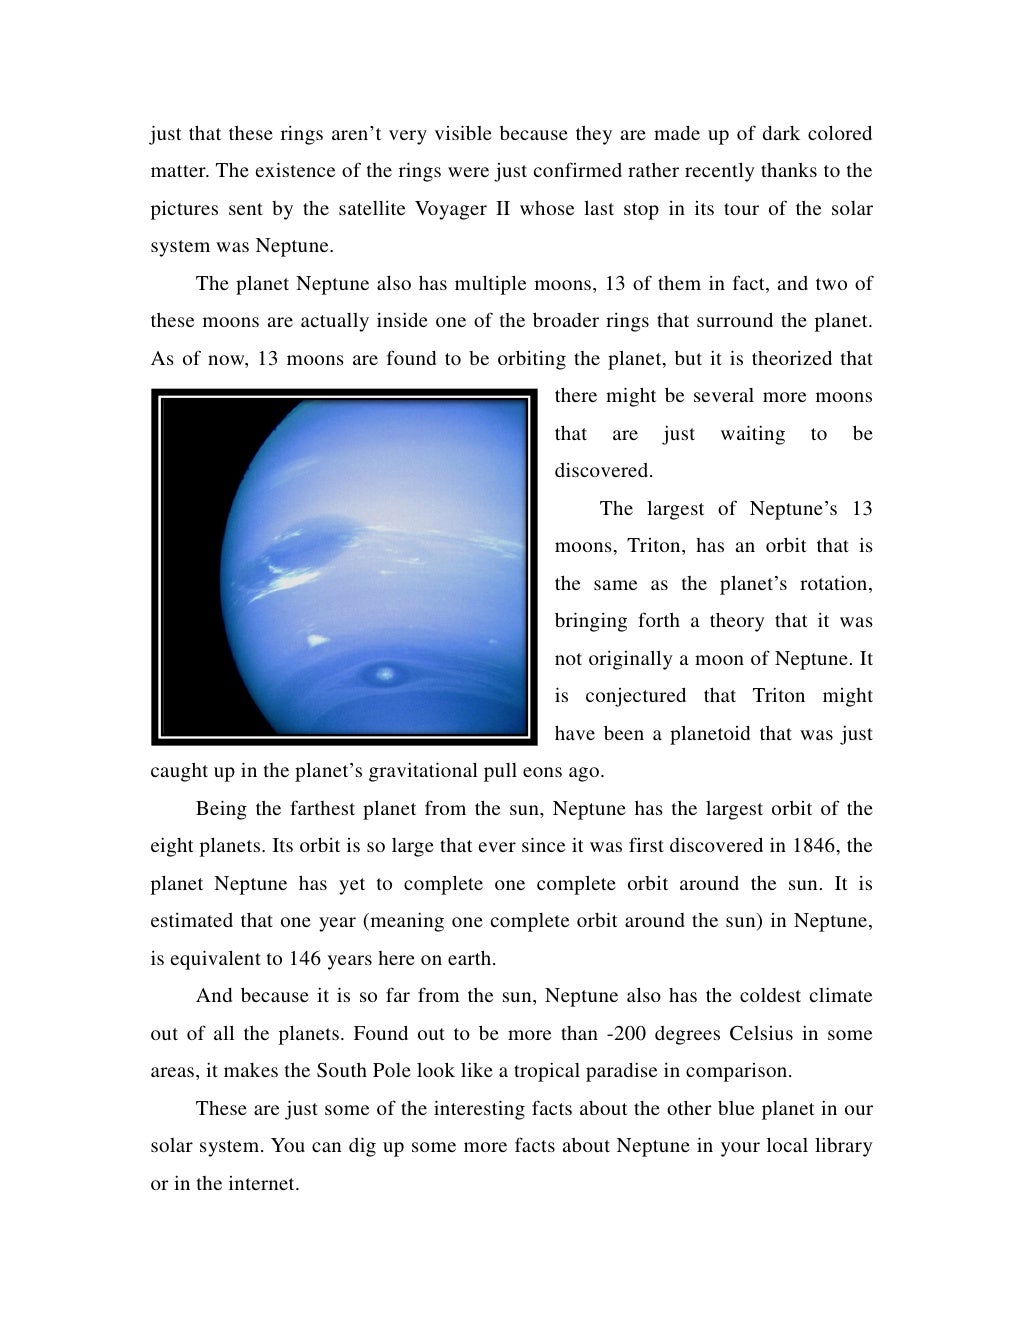 short essay about neptune